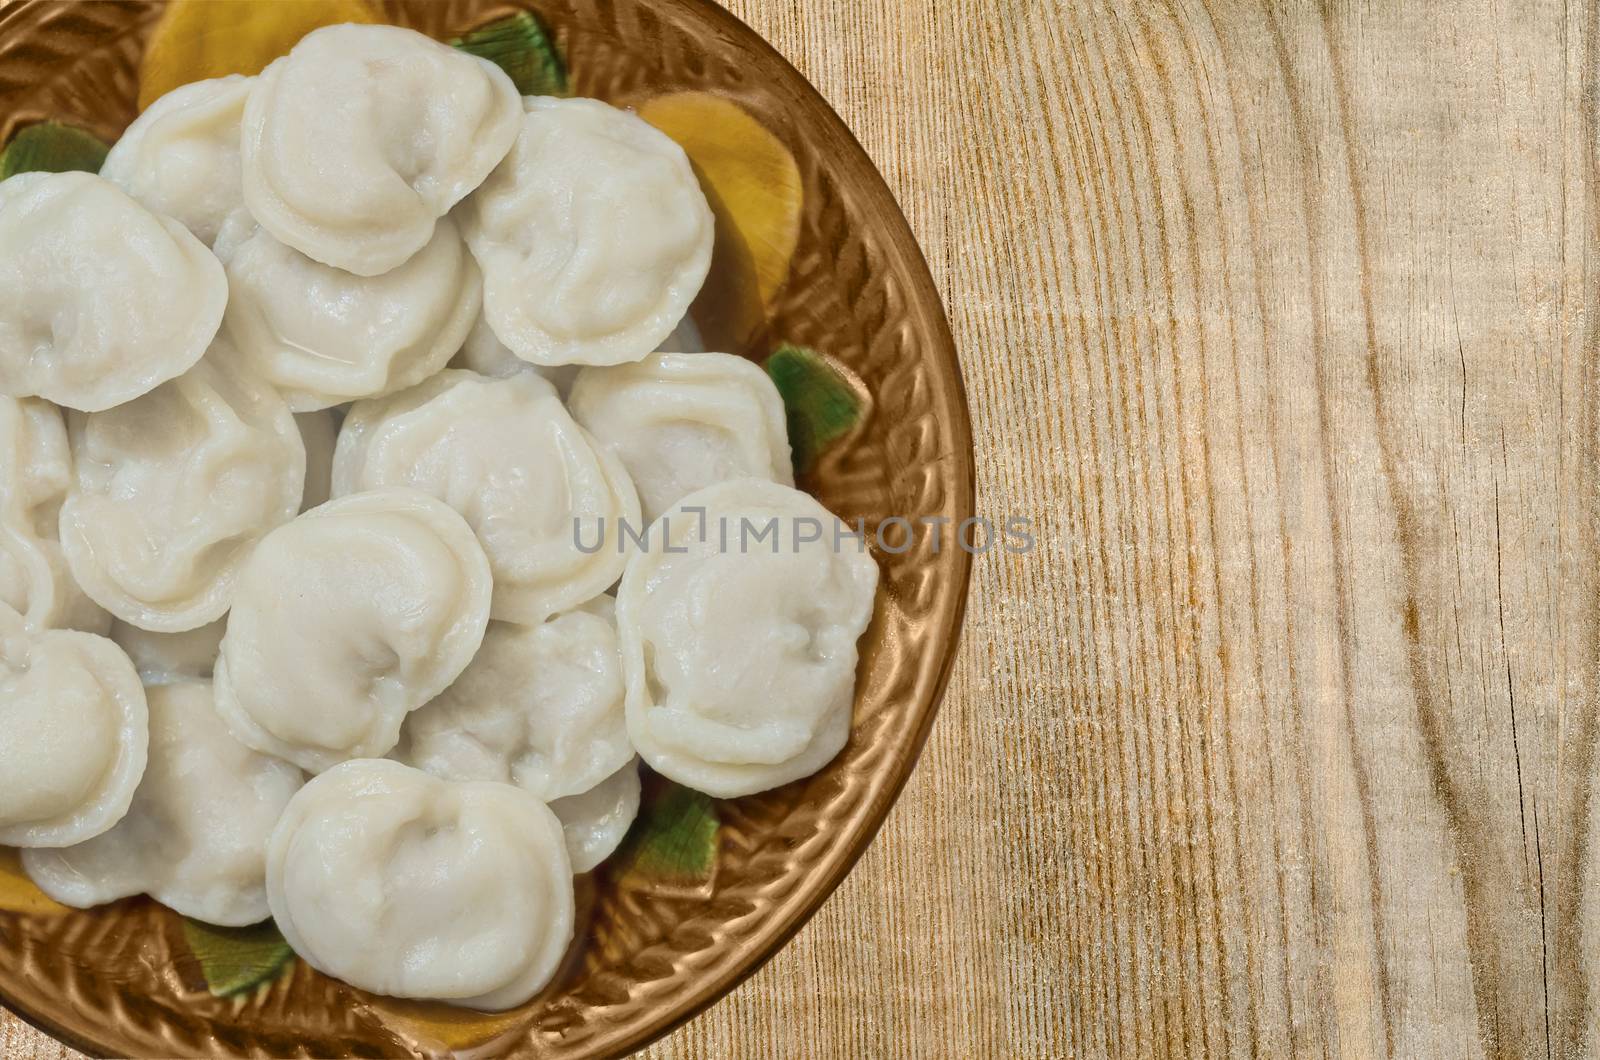 The finished dish of stuffed dough in ceramic bowl on wooden background